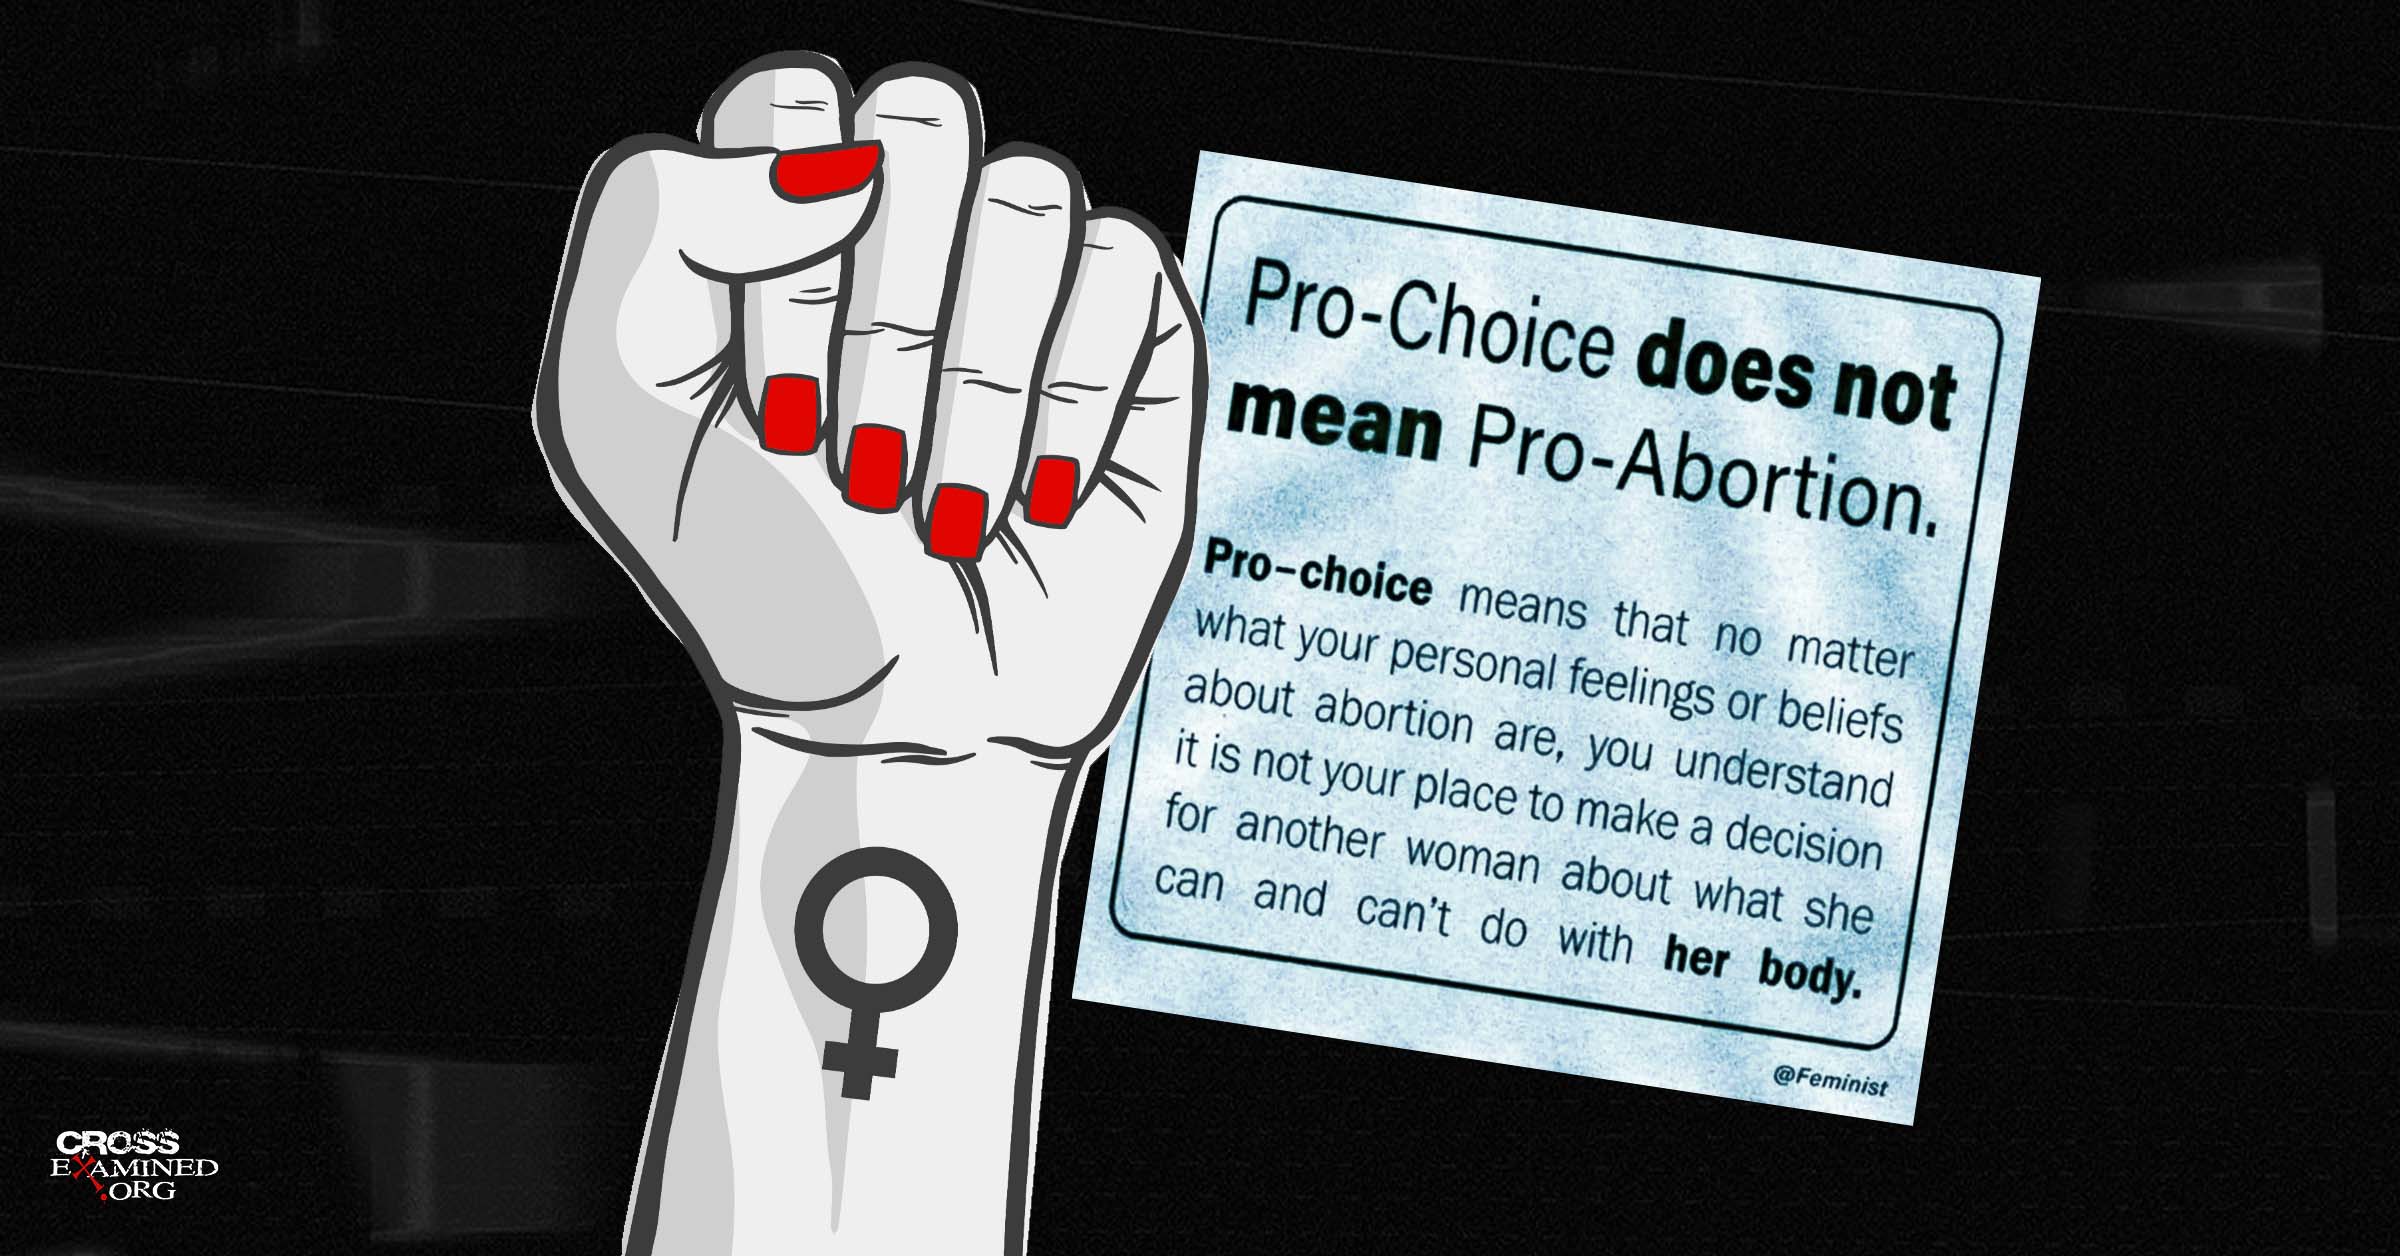  These Viral Pro-Choice Memes Miss the Point and Fail the Test of Logic